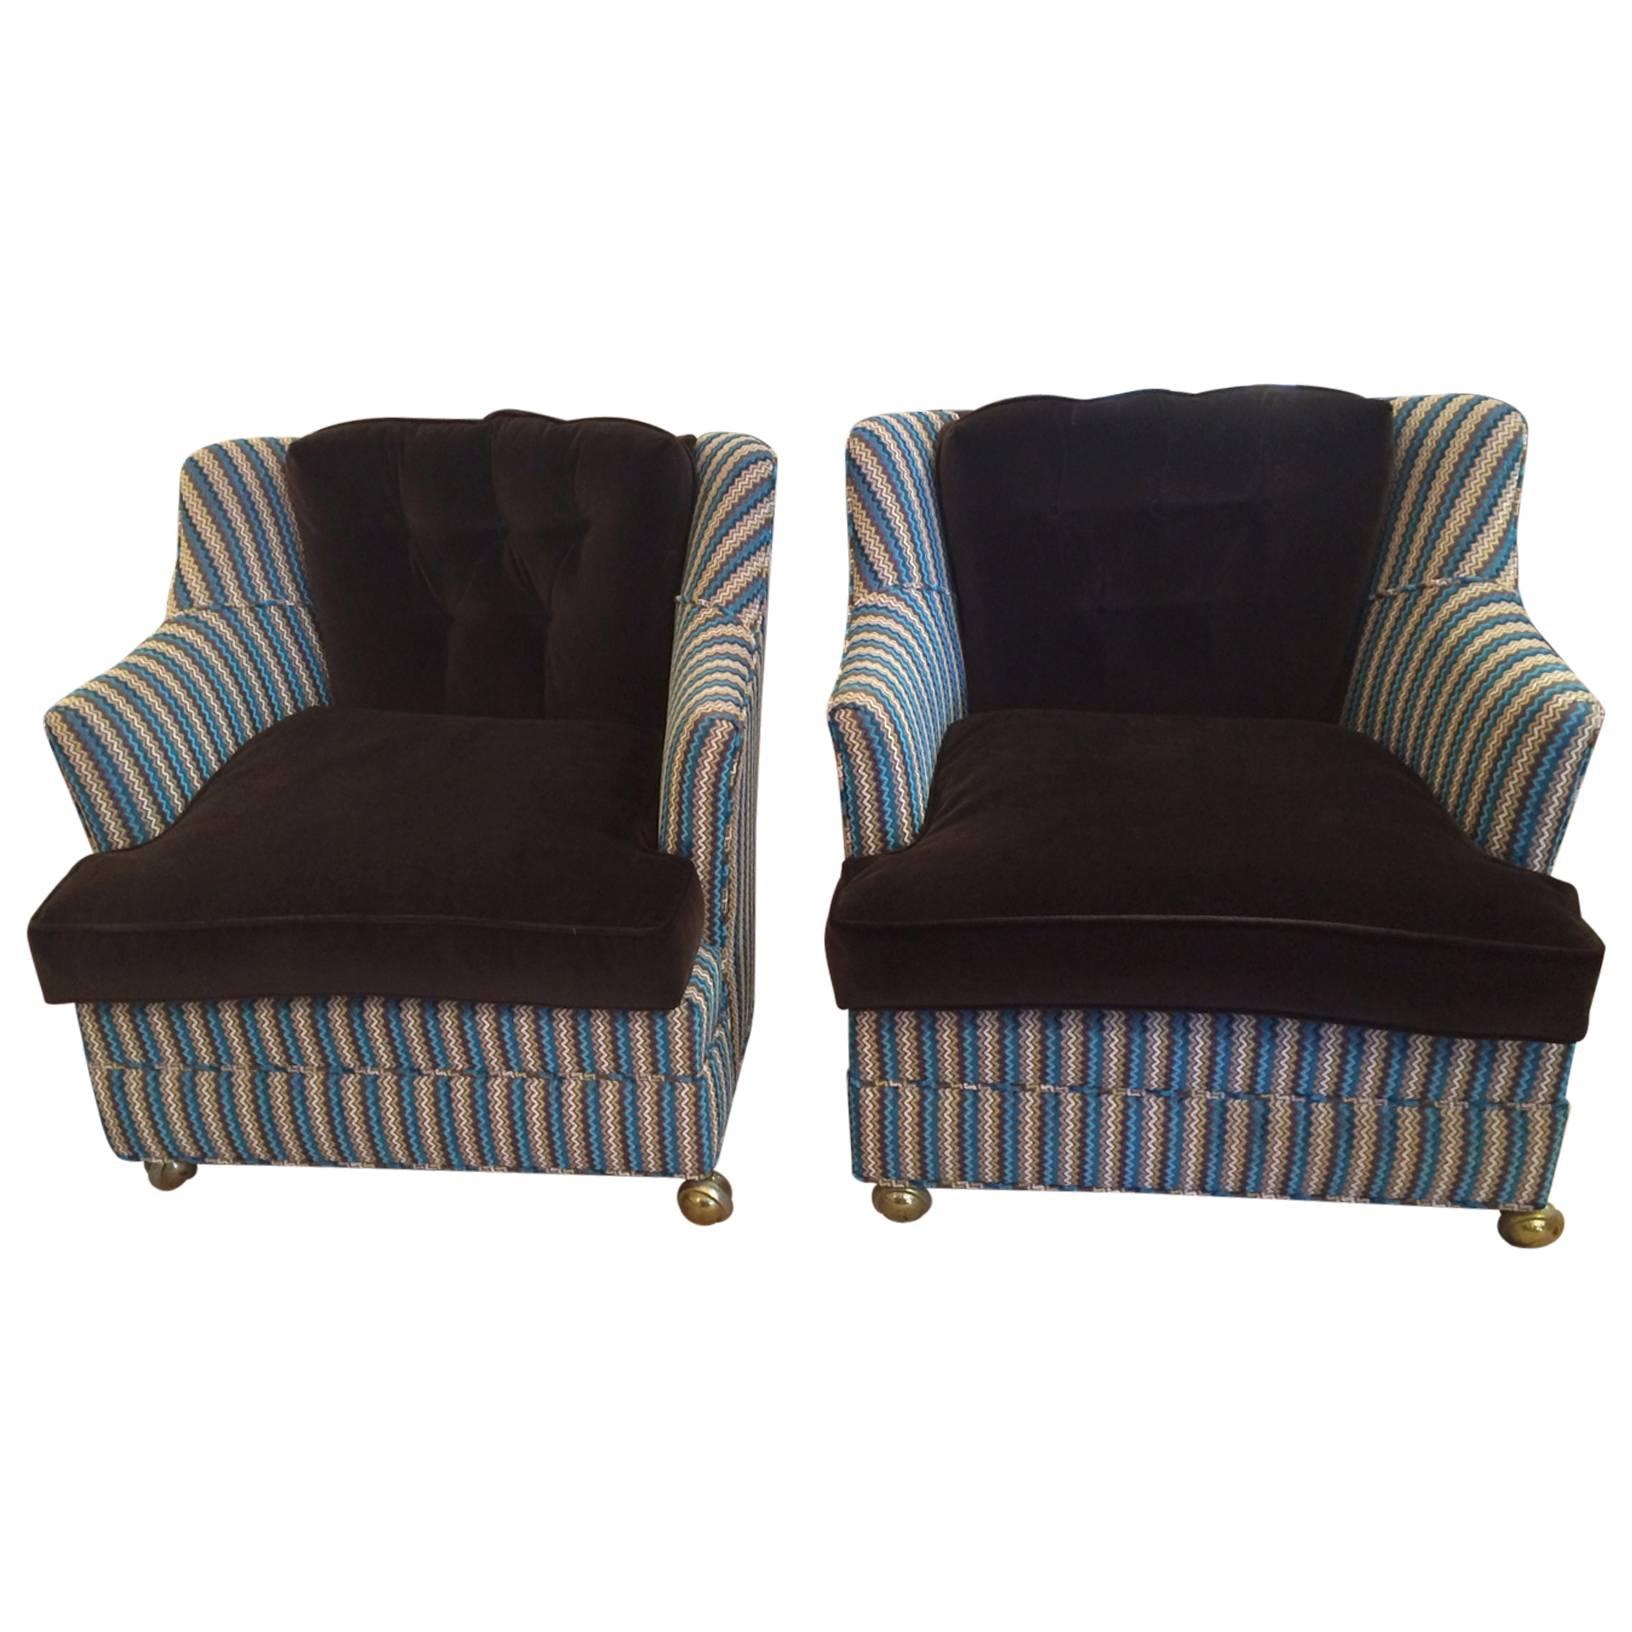 Pair of Vintage Club Chairs in Contemporary Fabrics